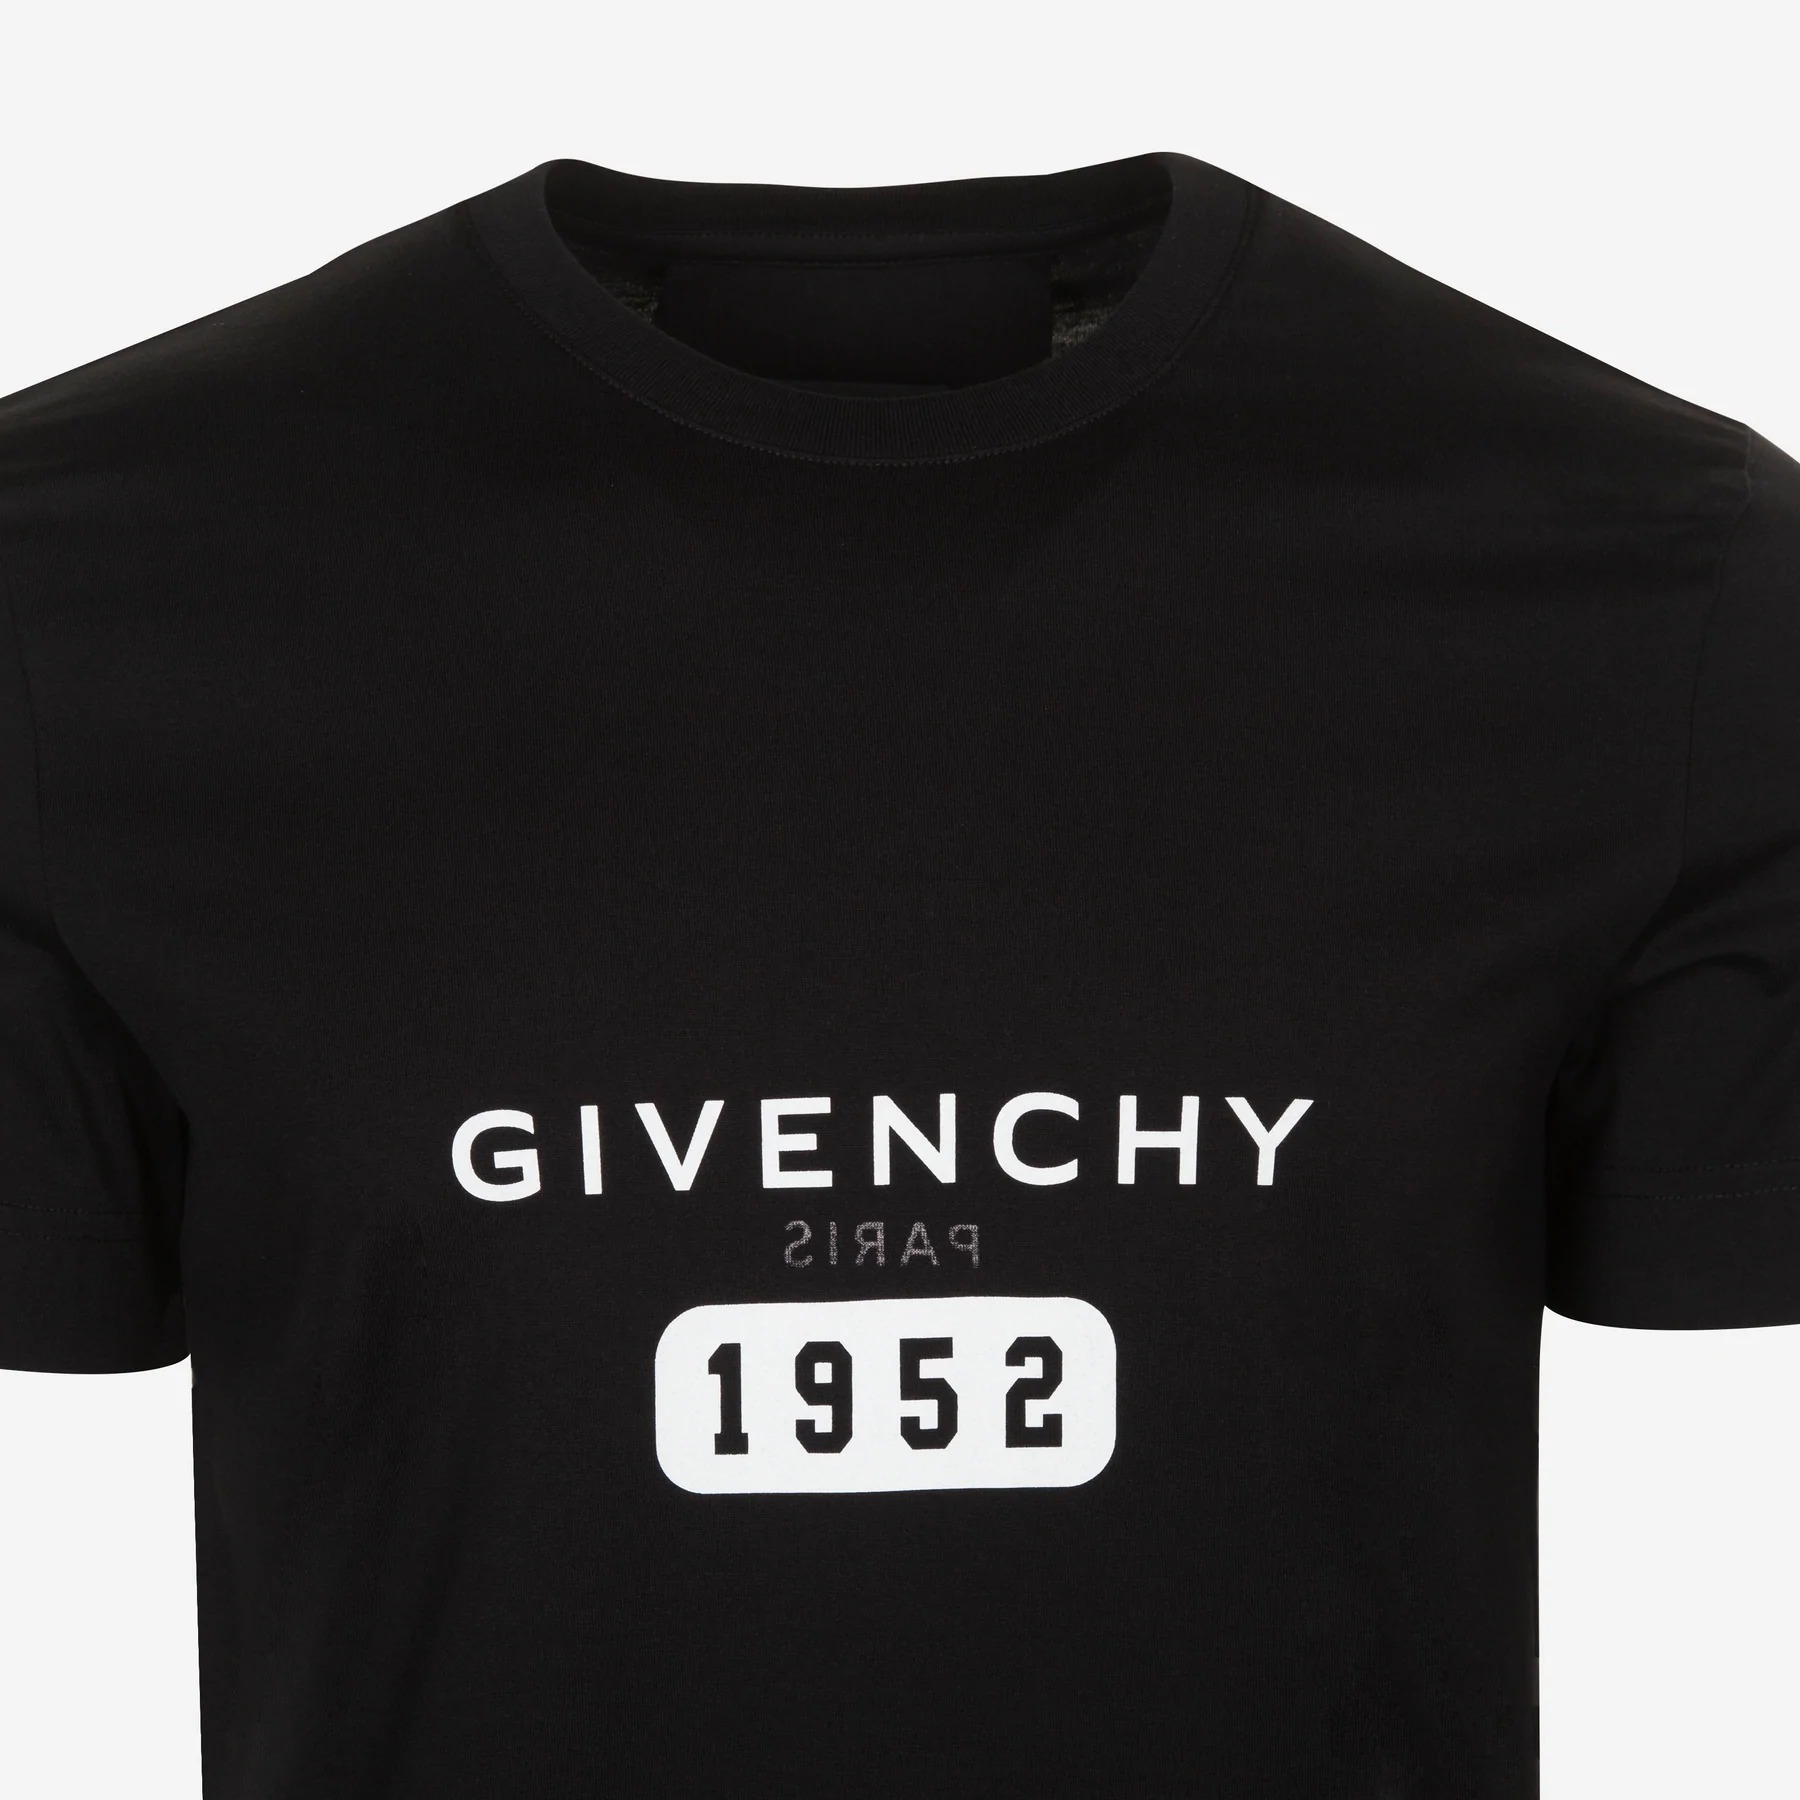 GIVENCHY T-SHIRT – lestyle